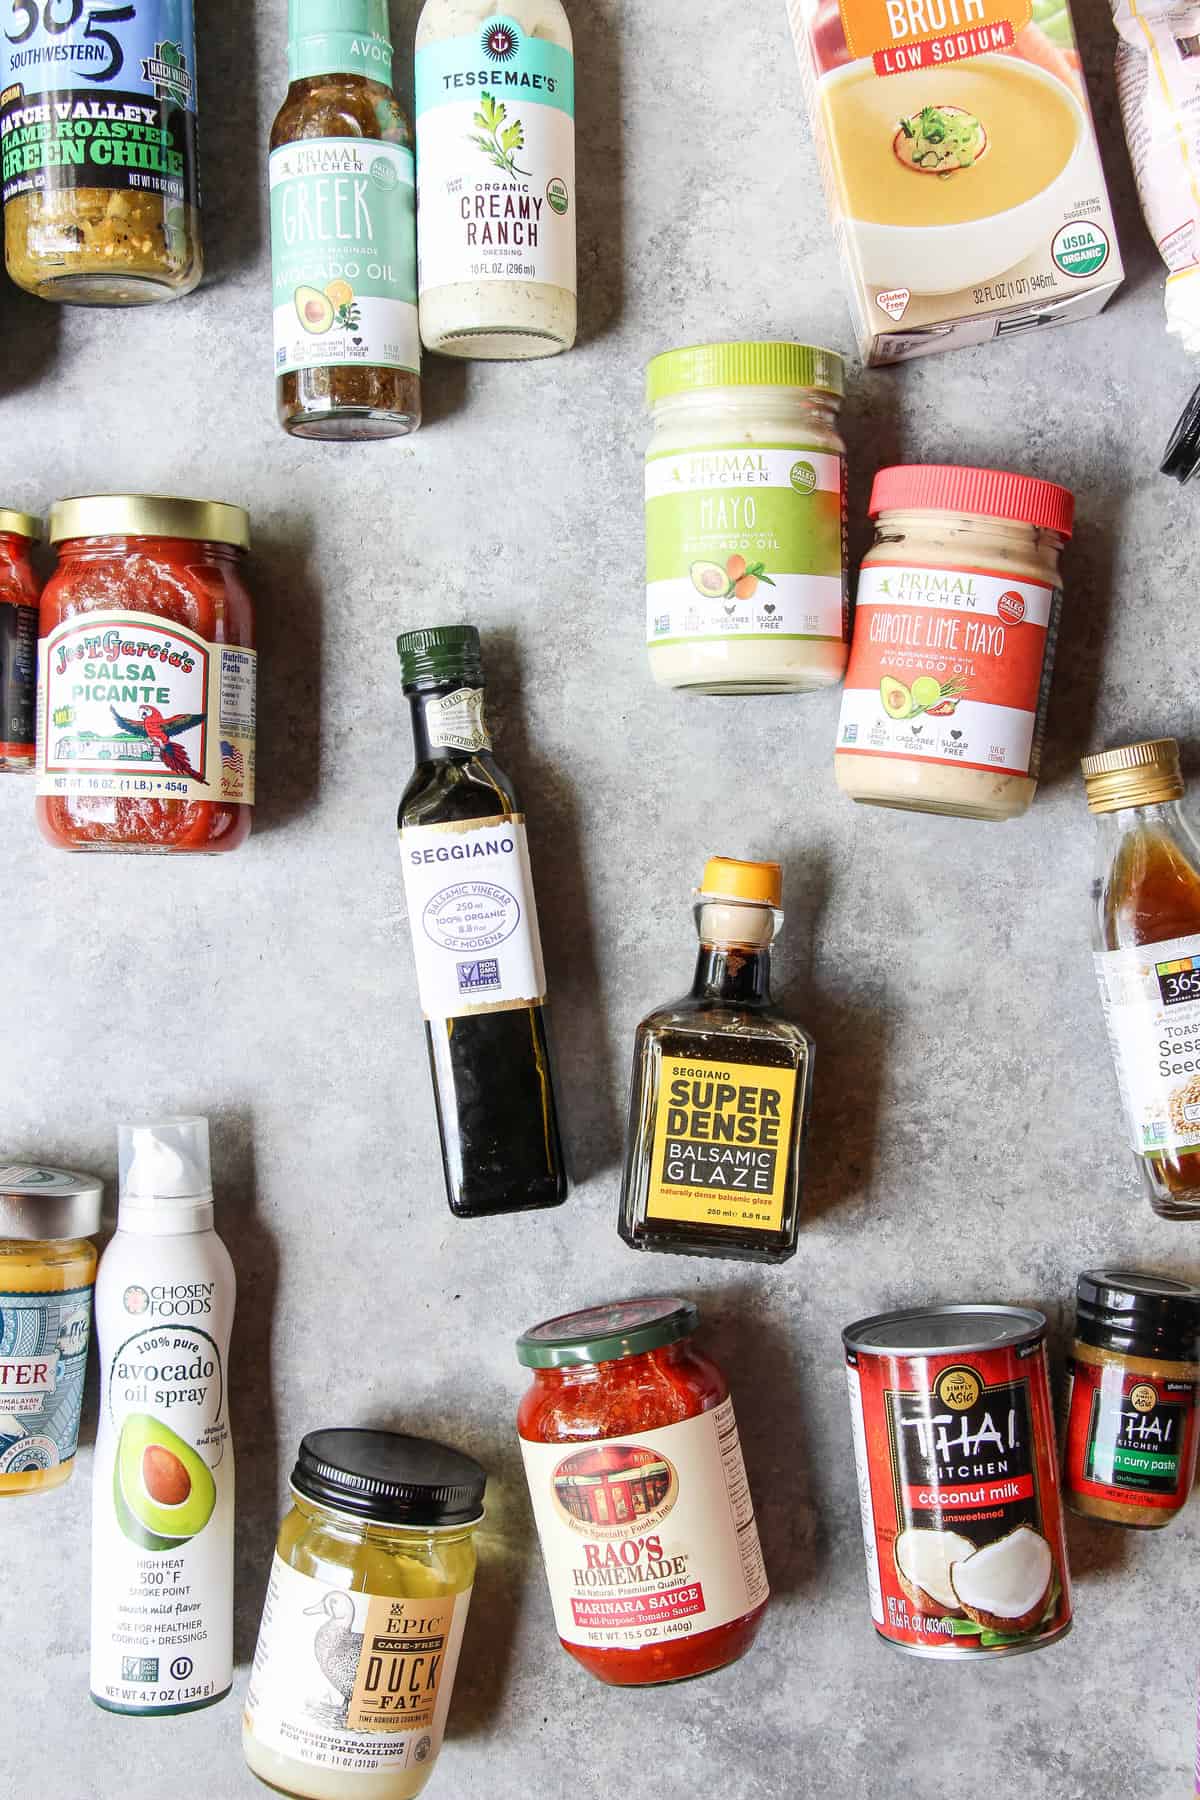 Whole30 Approved Products I love! — Happy WifeStyle™